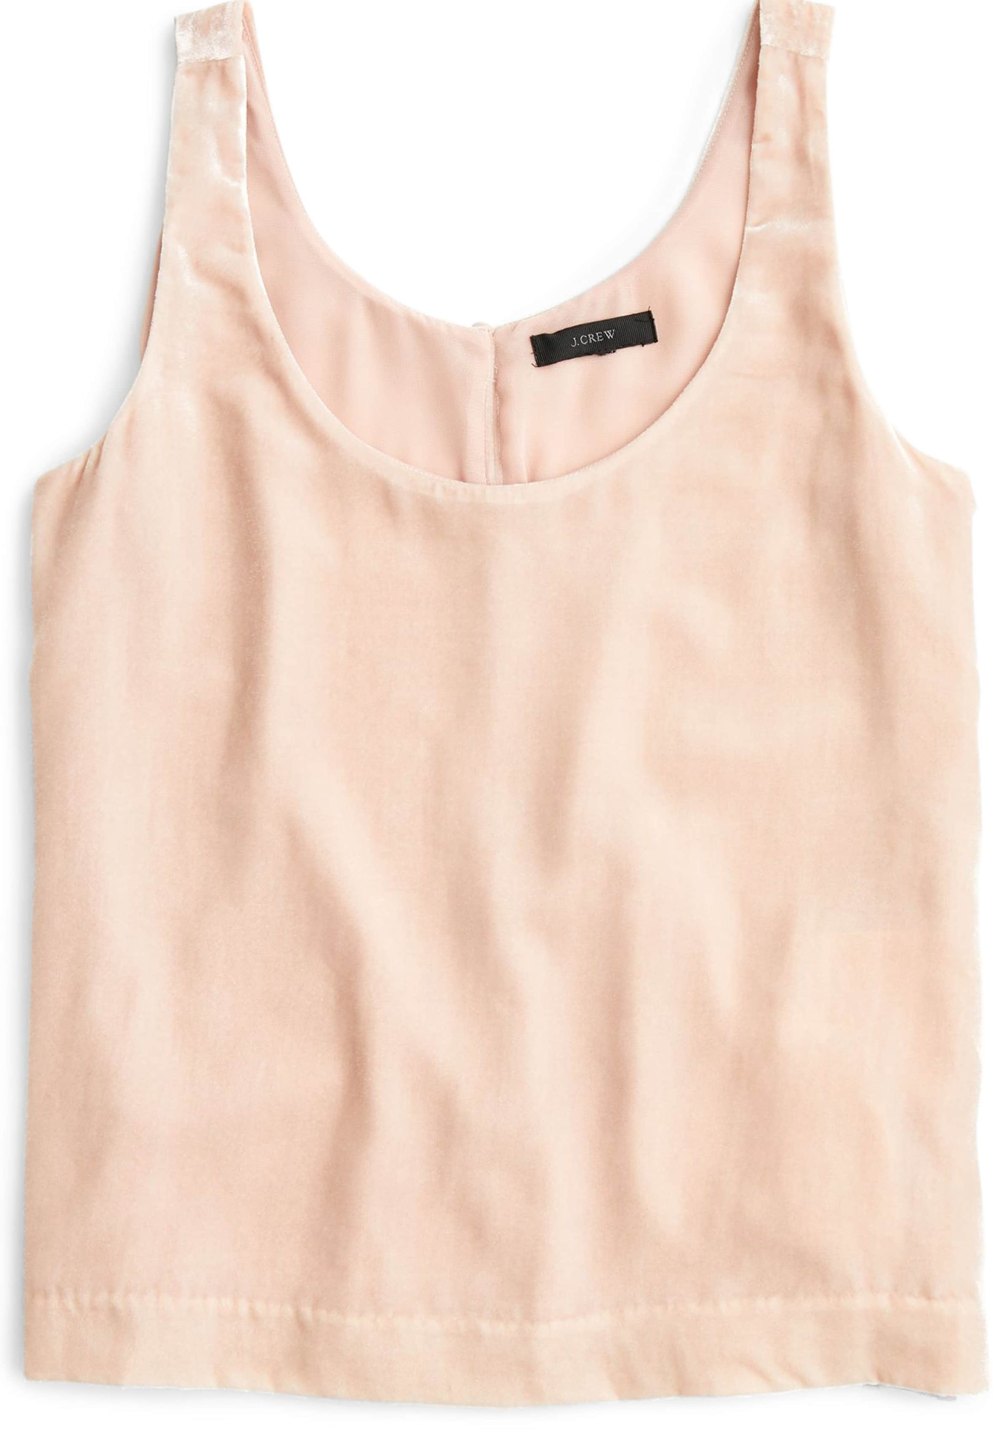 Shop This J.Crew Velvet Tank Top in Several Colors for Fall